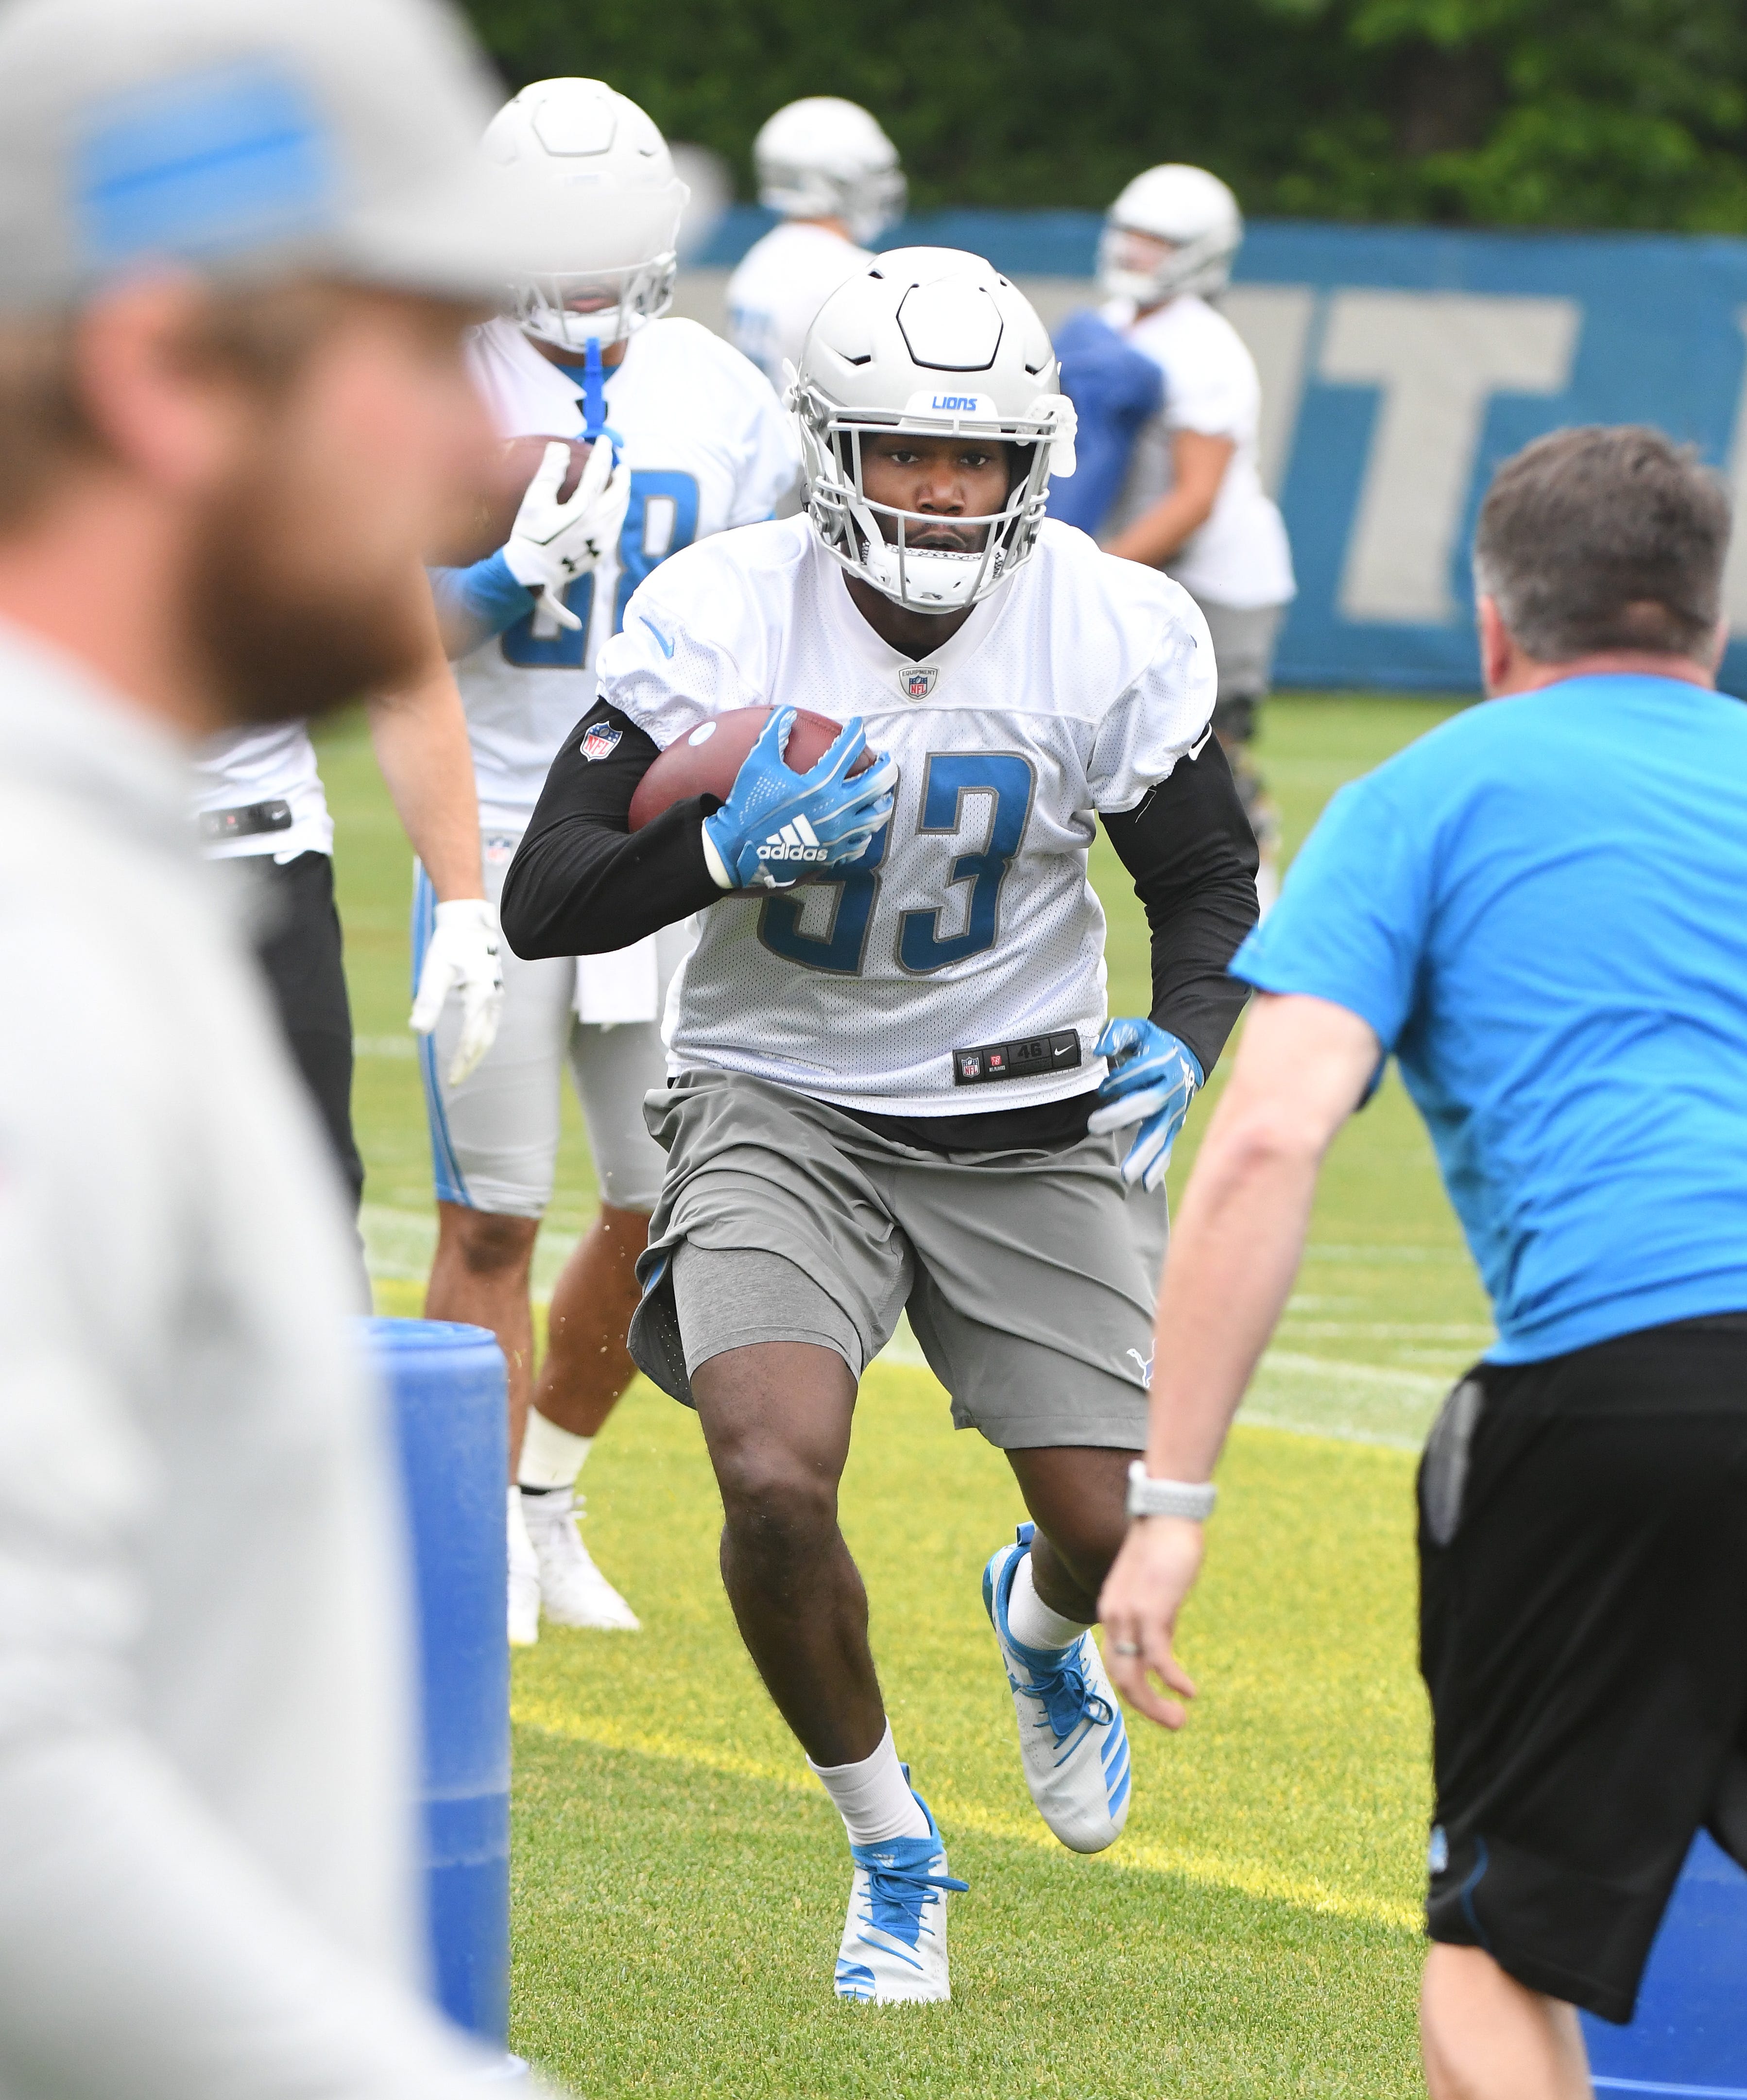 Lions running back Kerryon Johnson looks for the hole during drills.